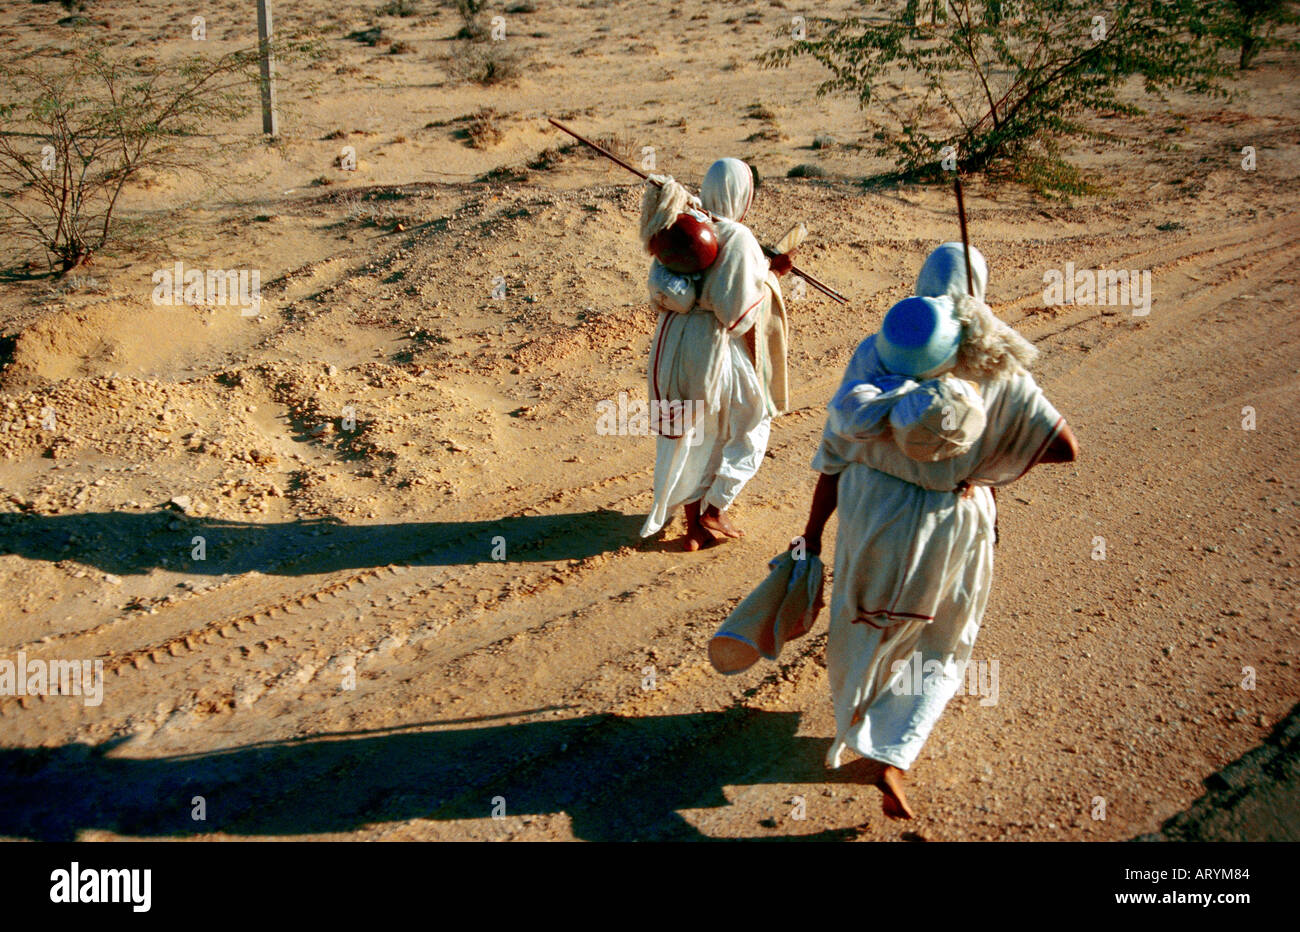 Rajasthan India Jain Nuns In Desert Carrying All Possessions Stock Photo